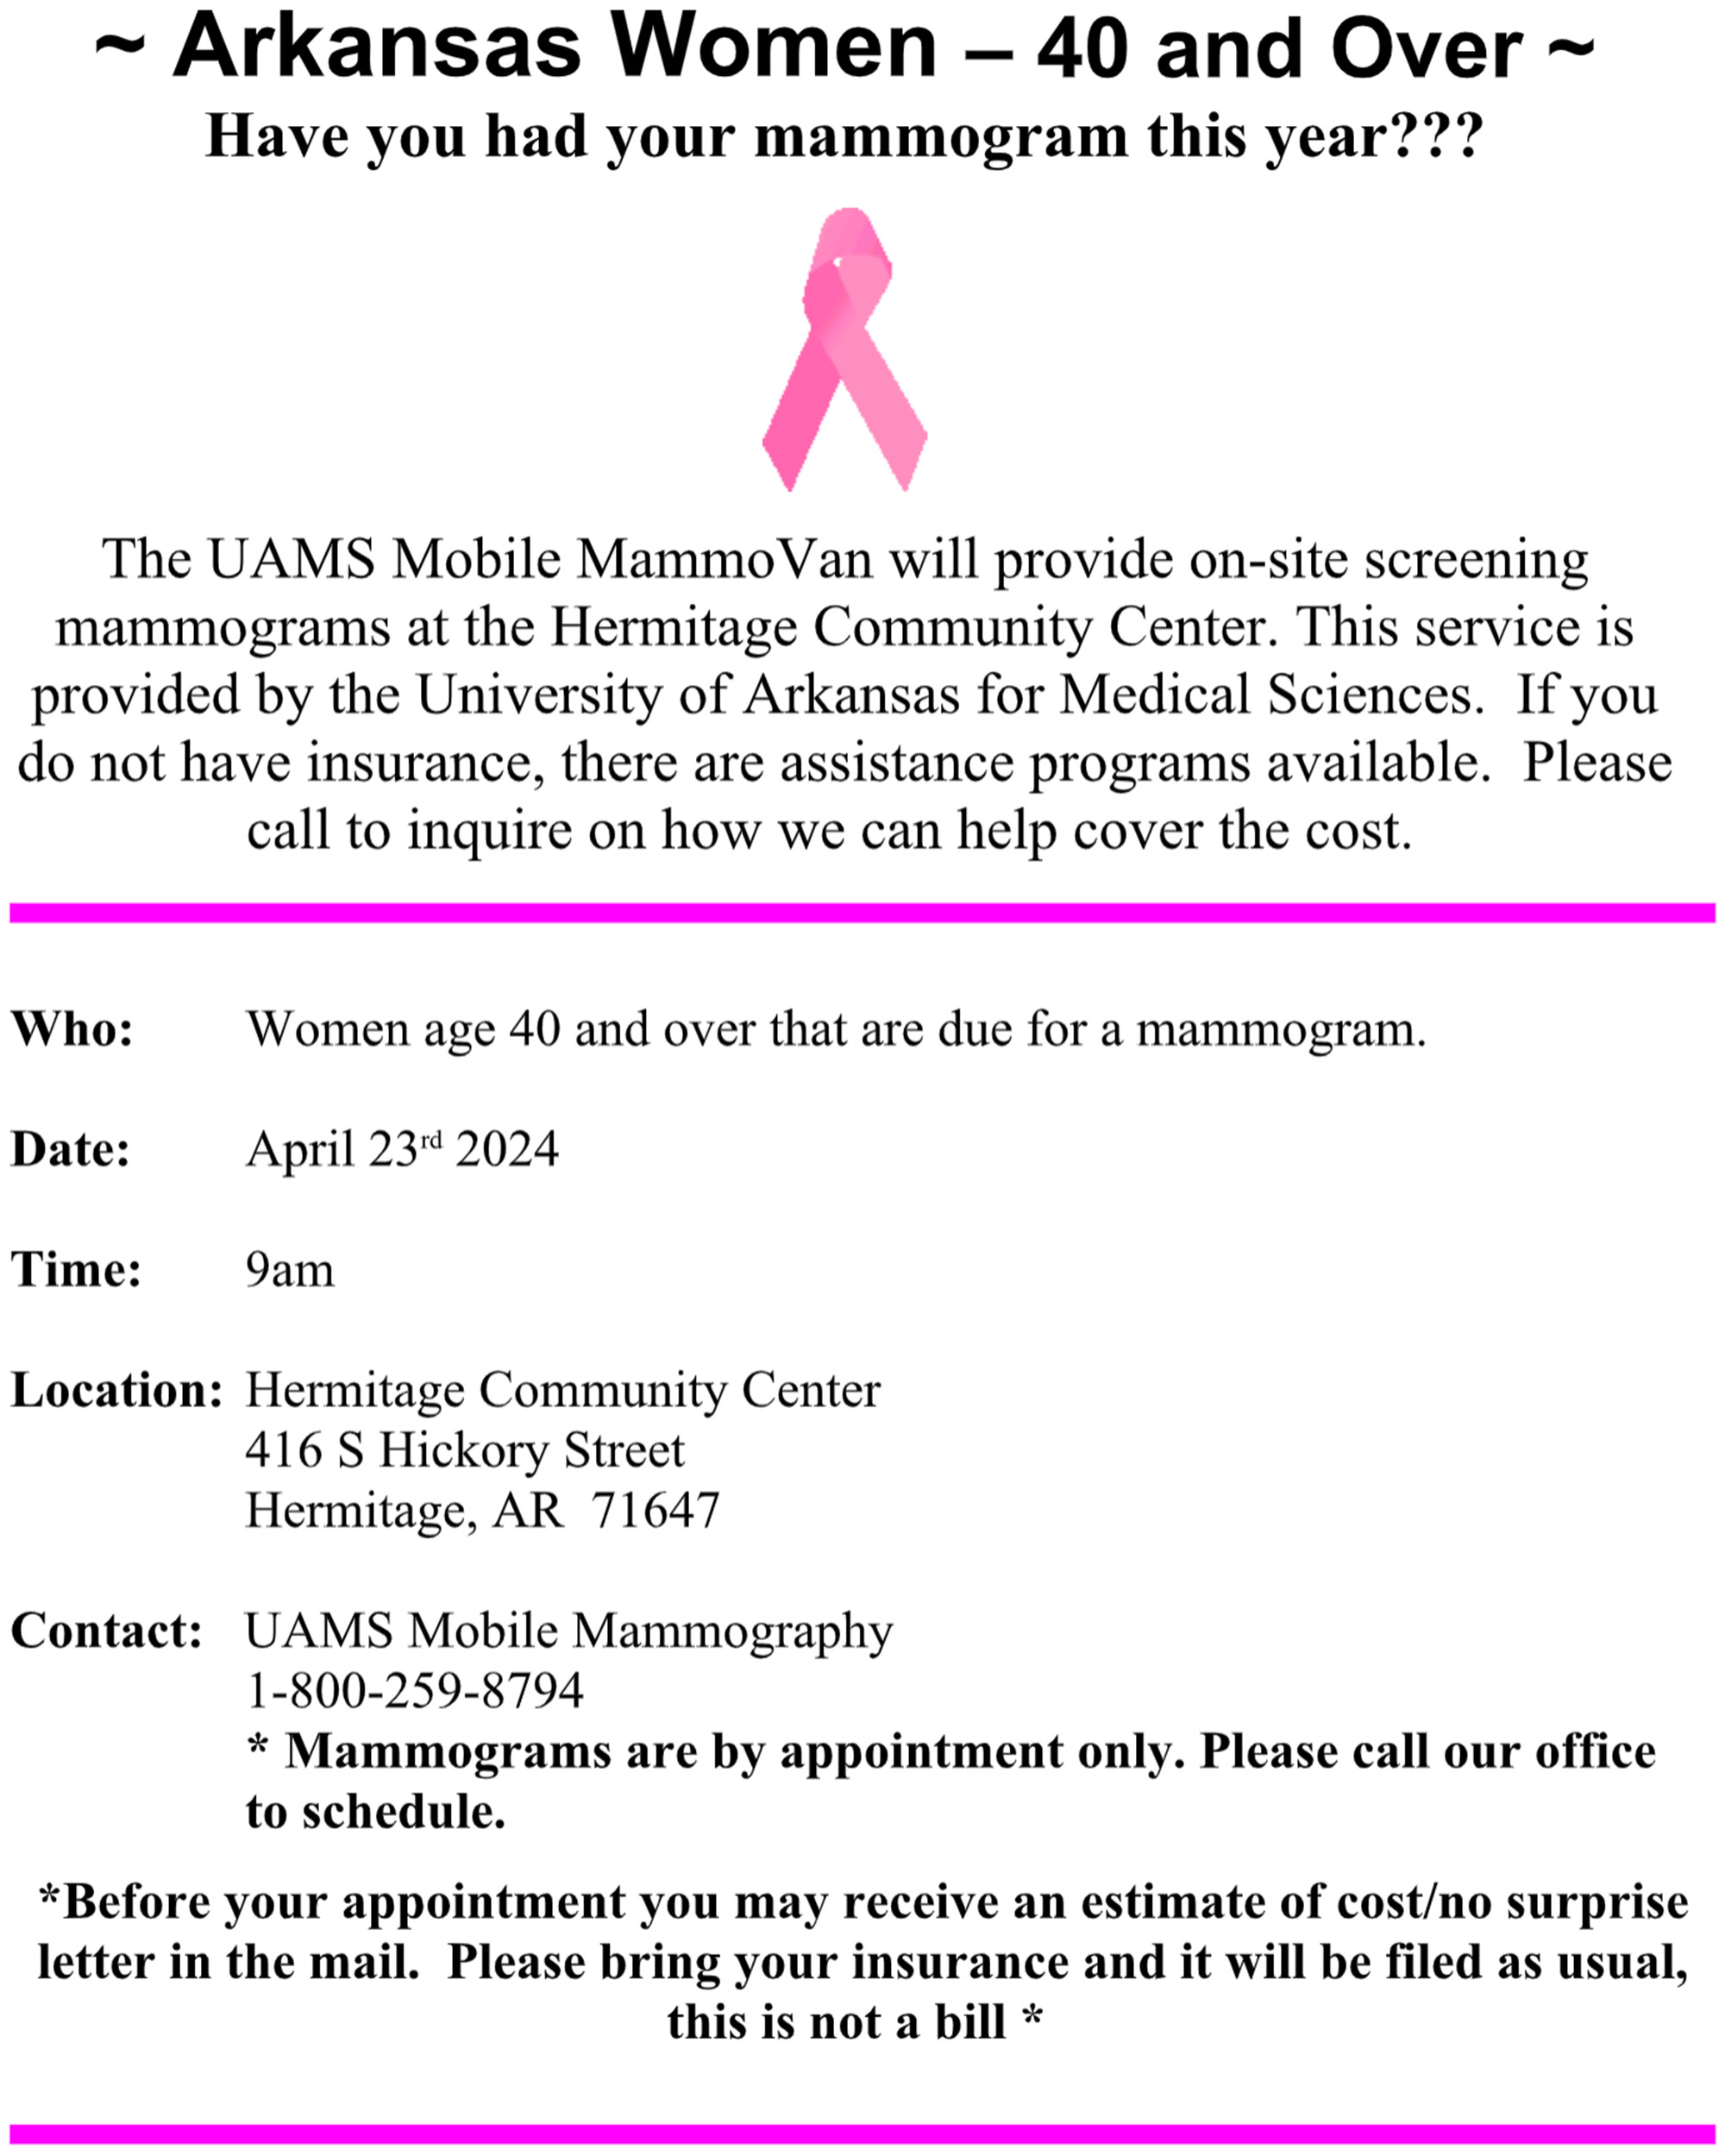 UAMS Mobile MammoVan coming to Hermitage Community Center April 23rd